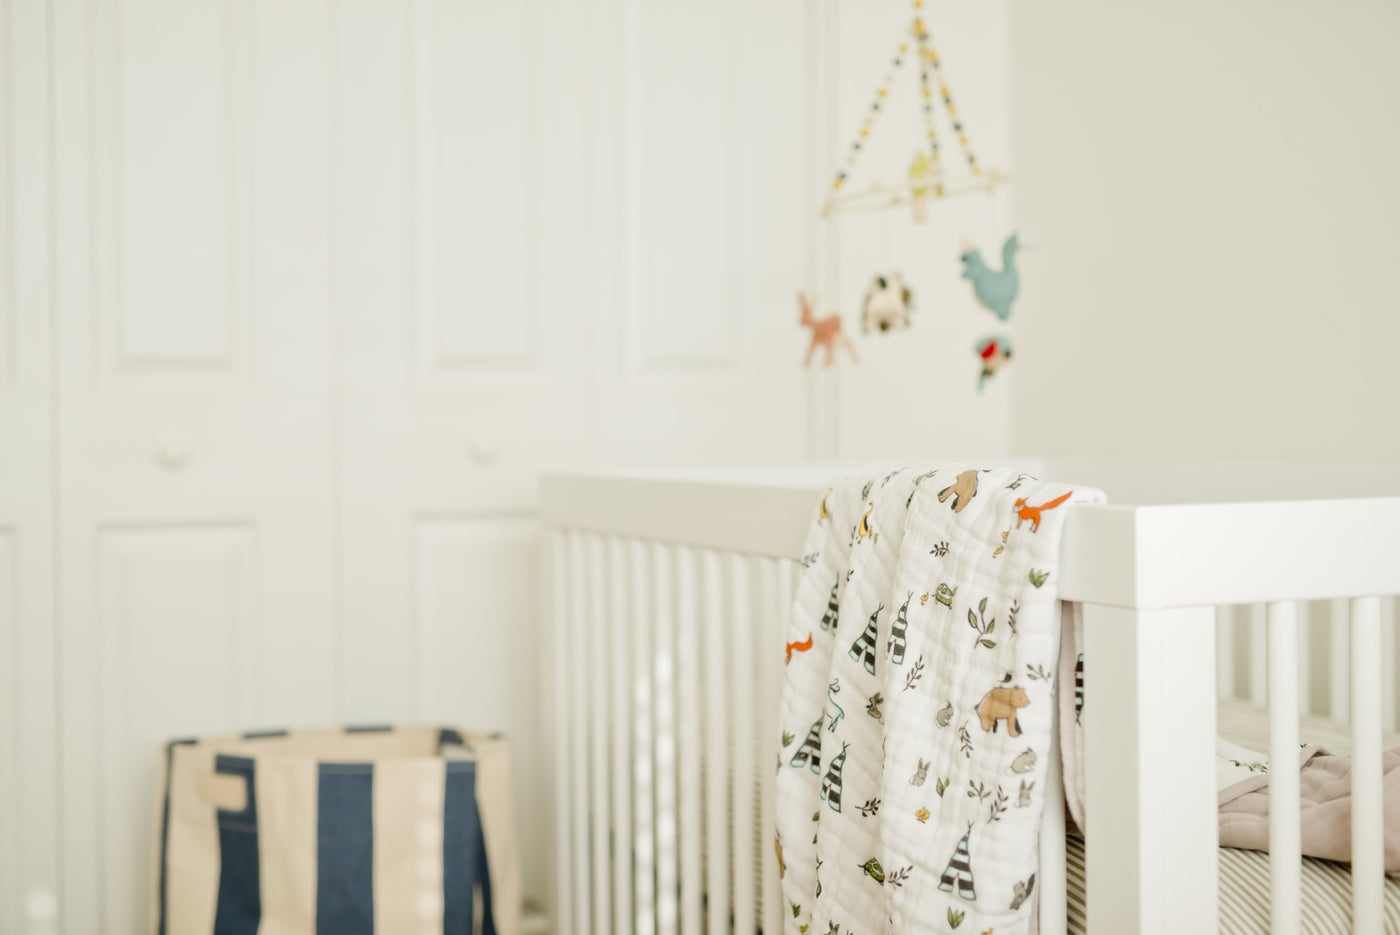 Baby's quilt draped over a cot in a nursery